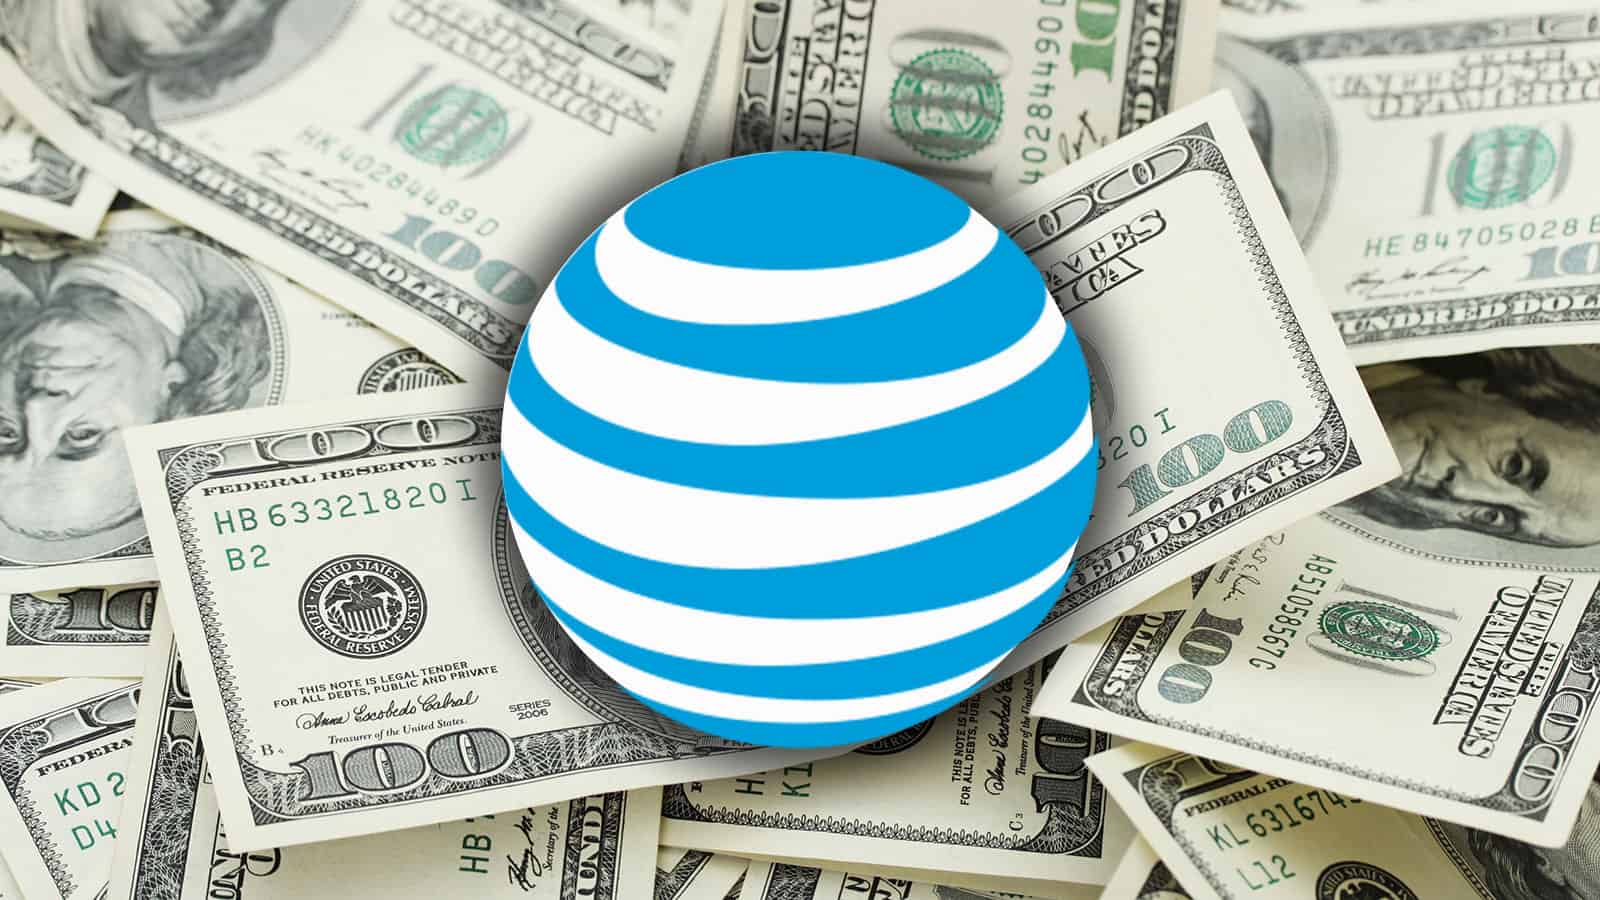 AT&T Raising iPhone’s Grandfathered Unlimited Data Plan to $45/month